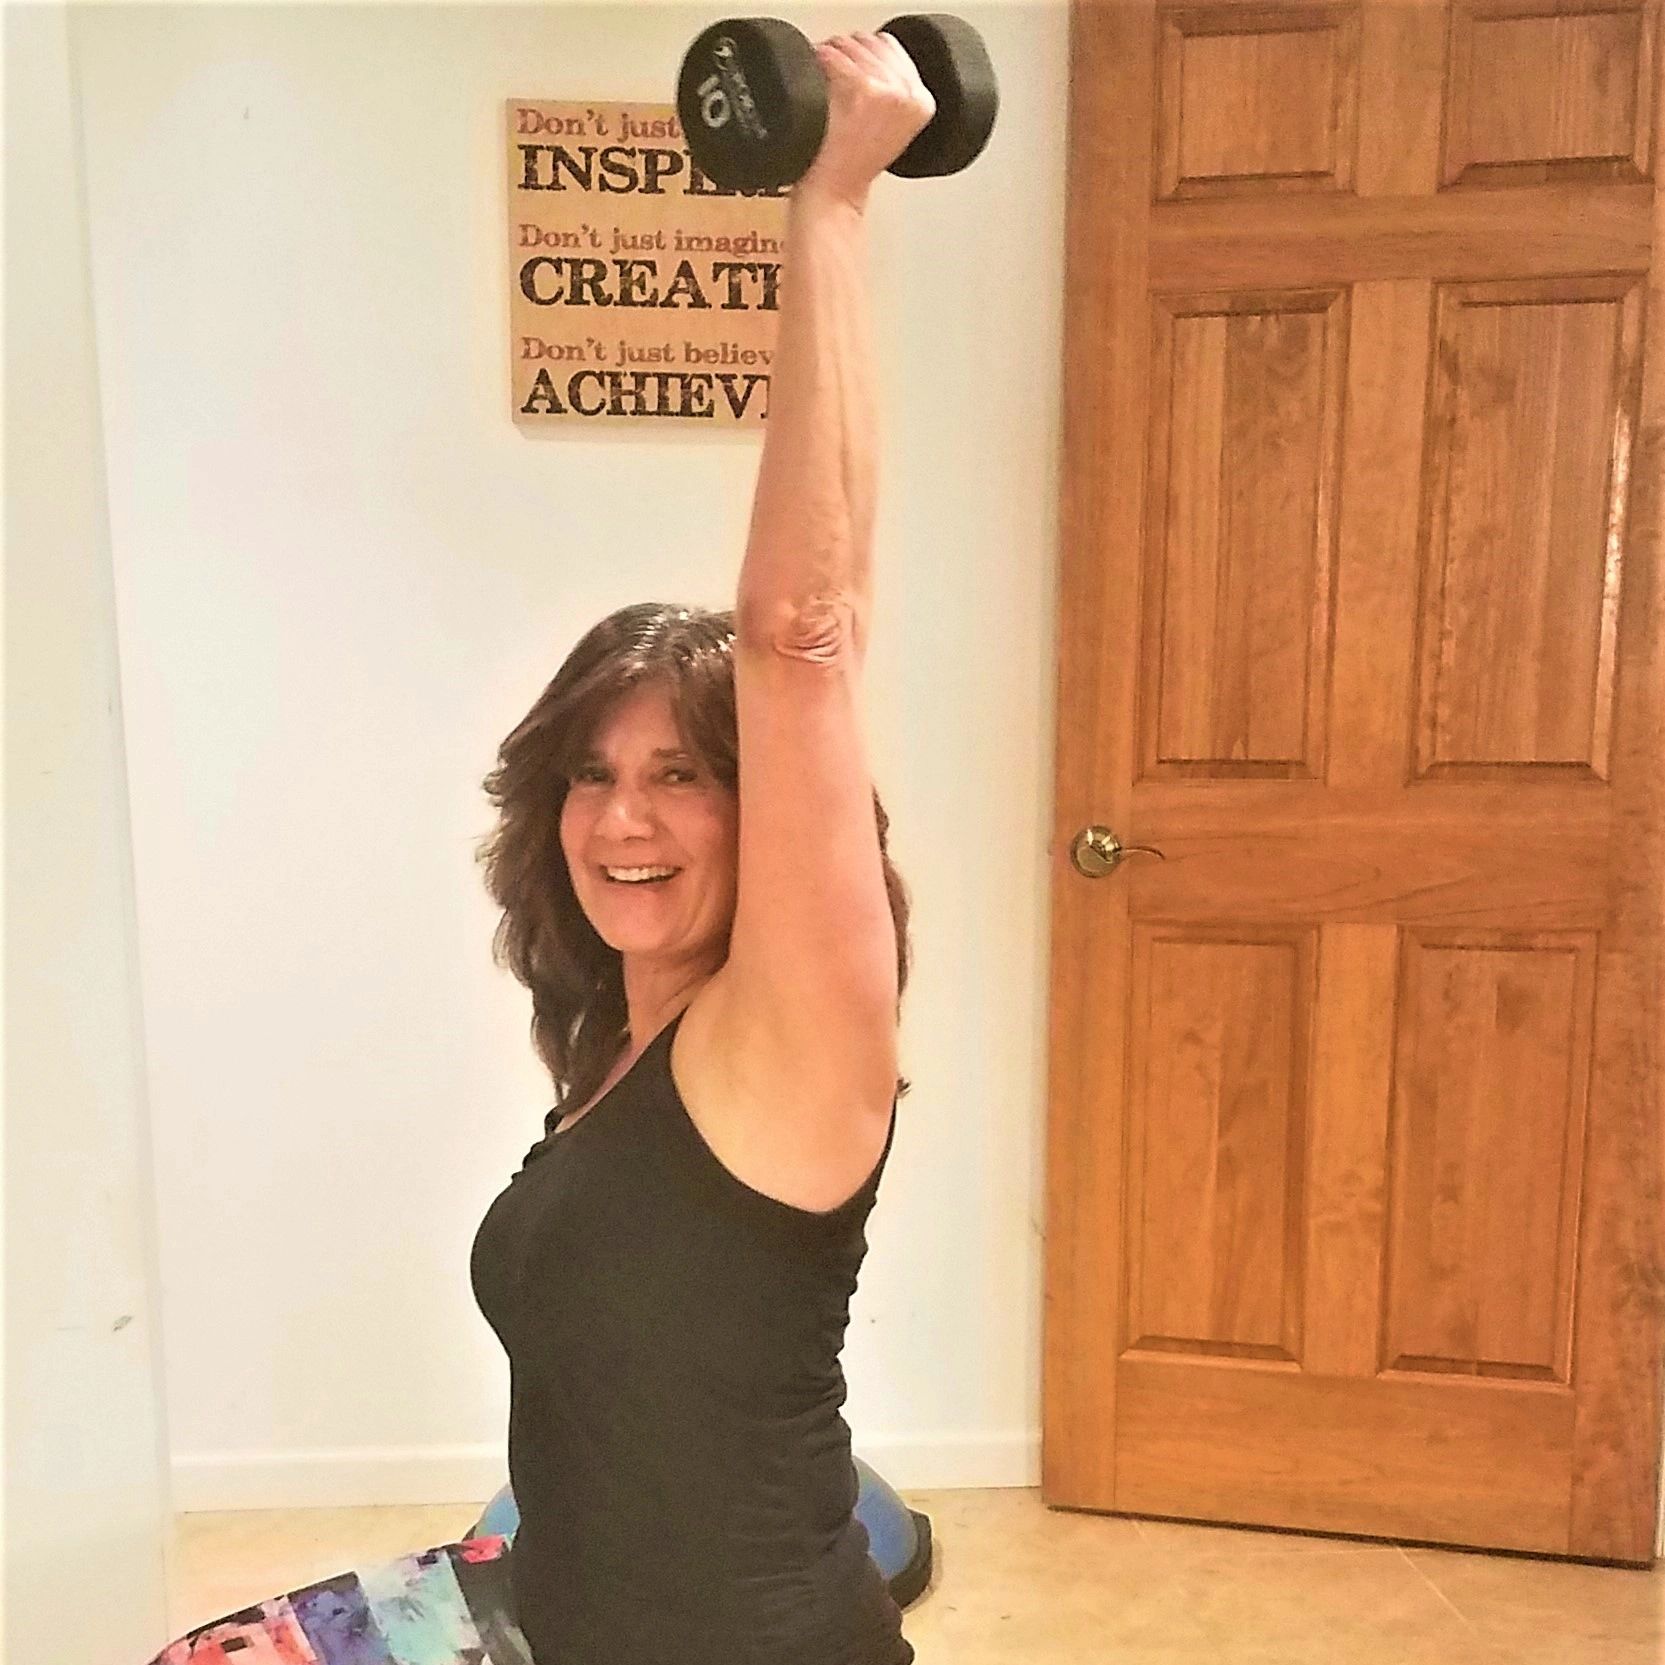 Personal Trainer Cathy Florakis performing a Lunge and Overhead Press